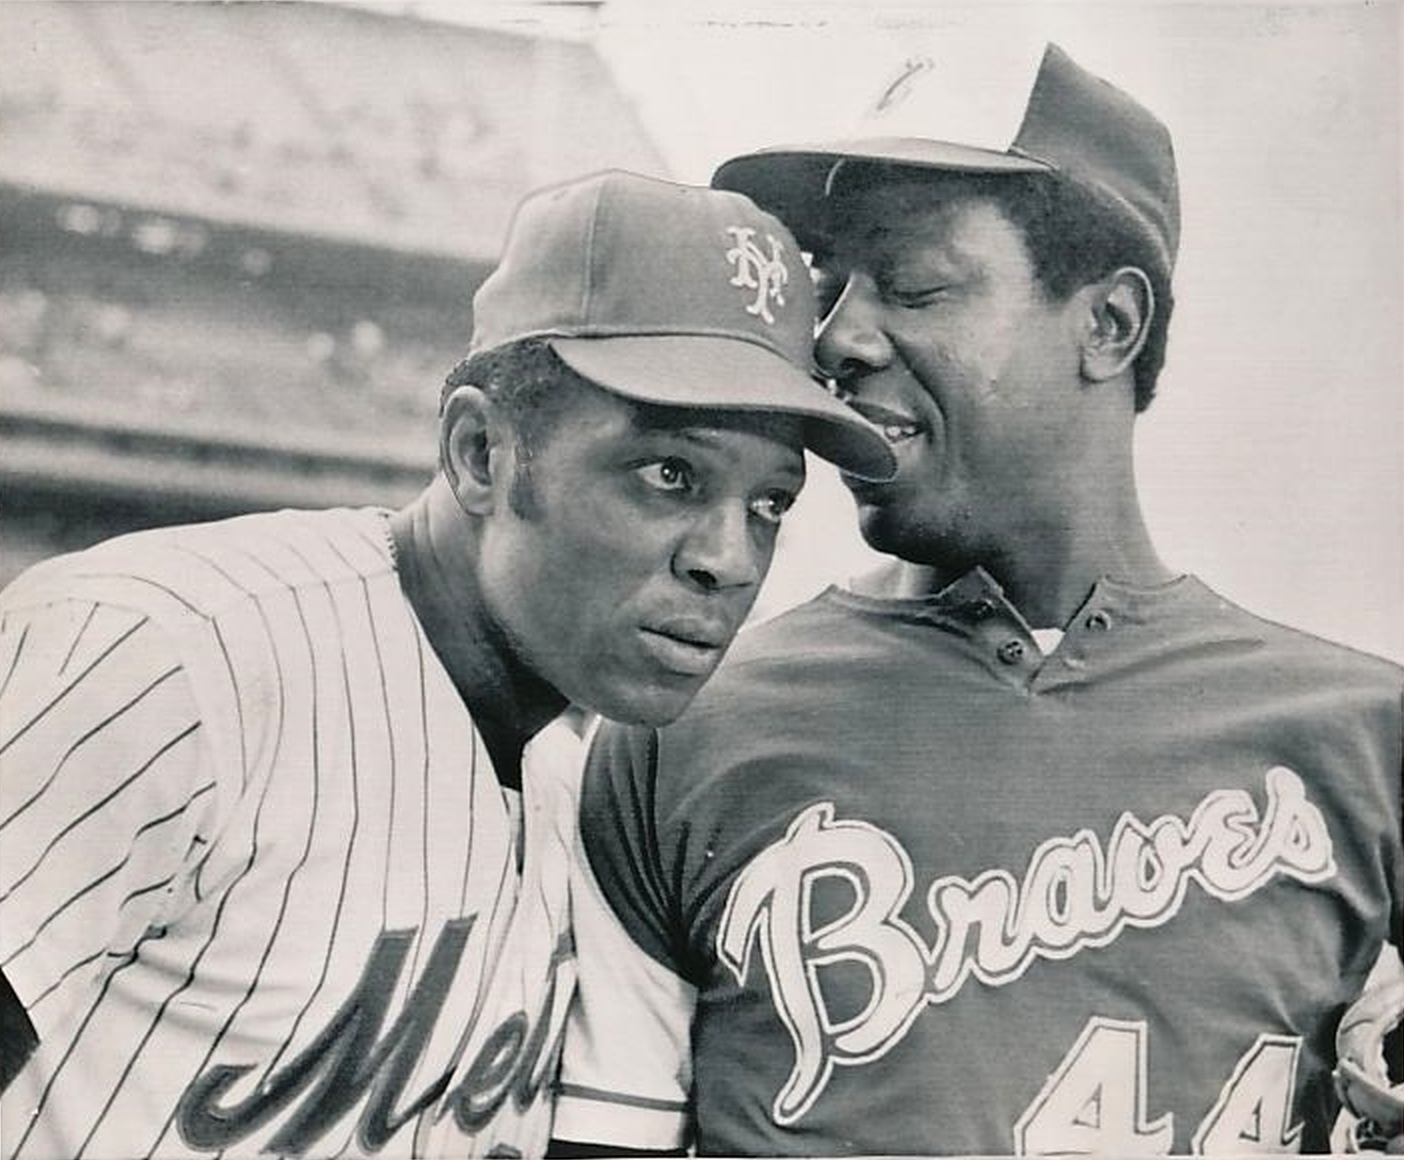 The Stress of Hank Aaron Breaking Babe Ruth's All-Time Home Run Record